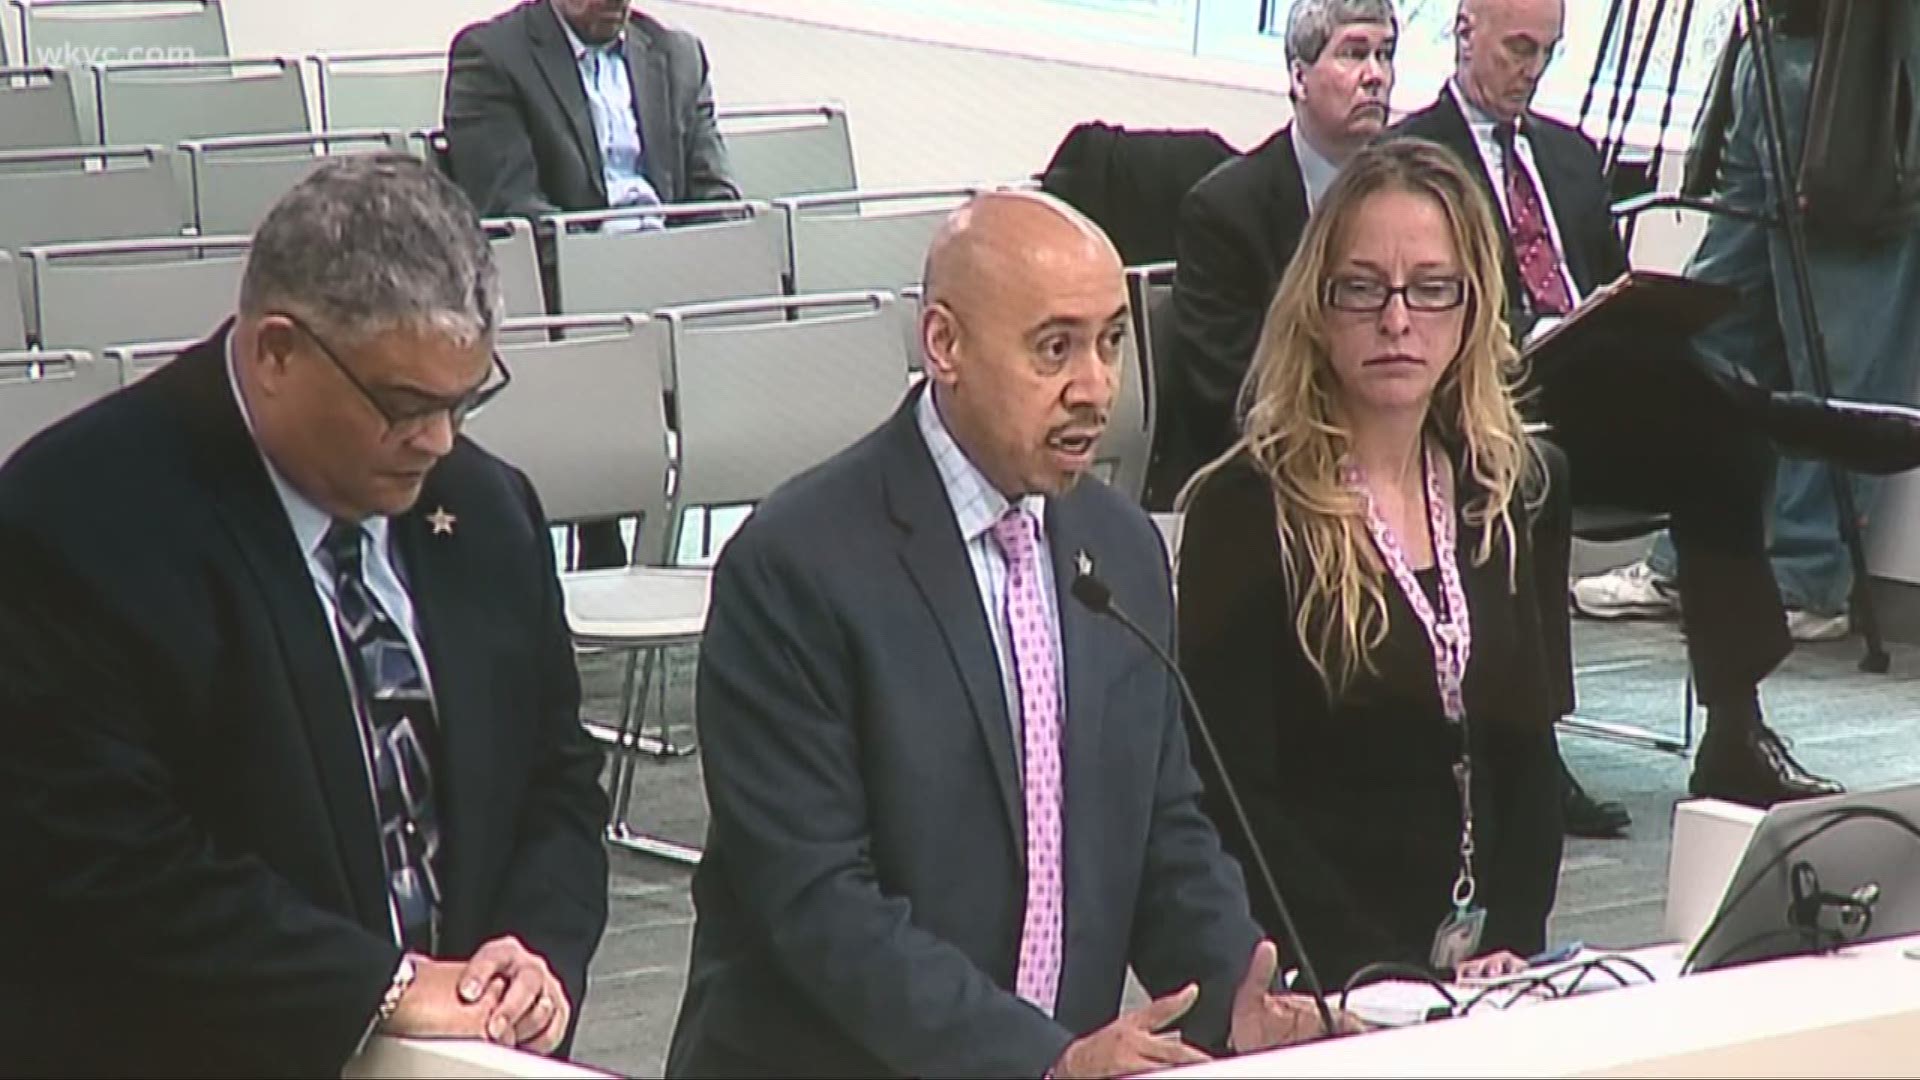 Cuyahoga County Jail leaders grilled during tense council meeting